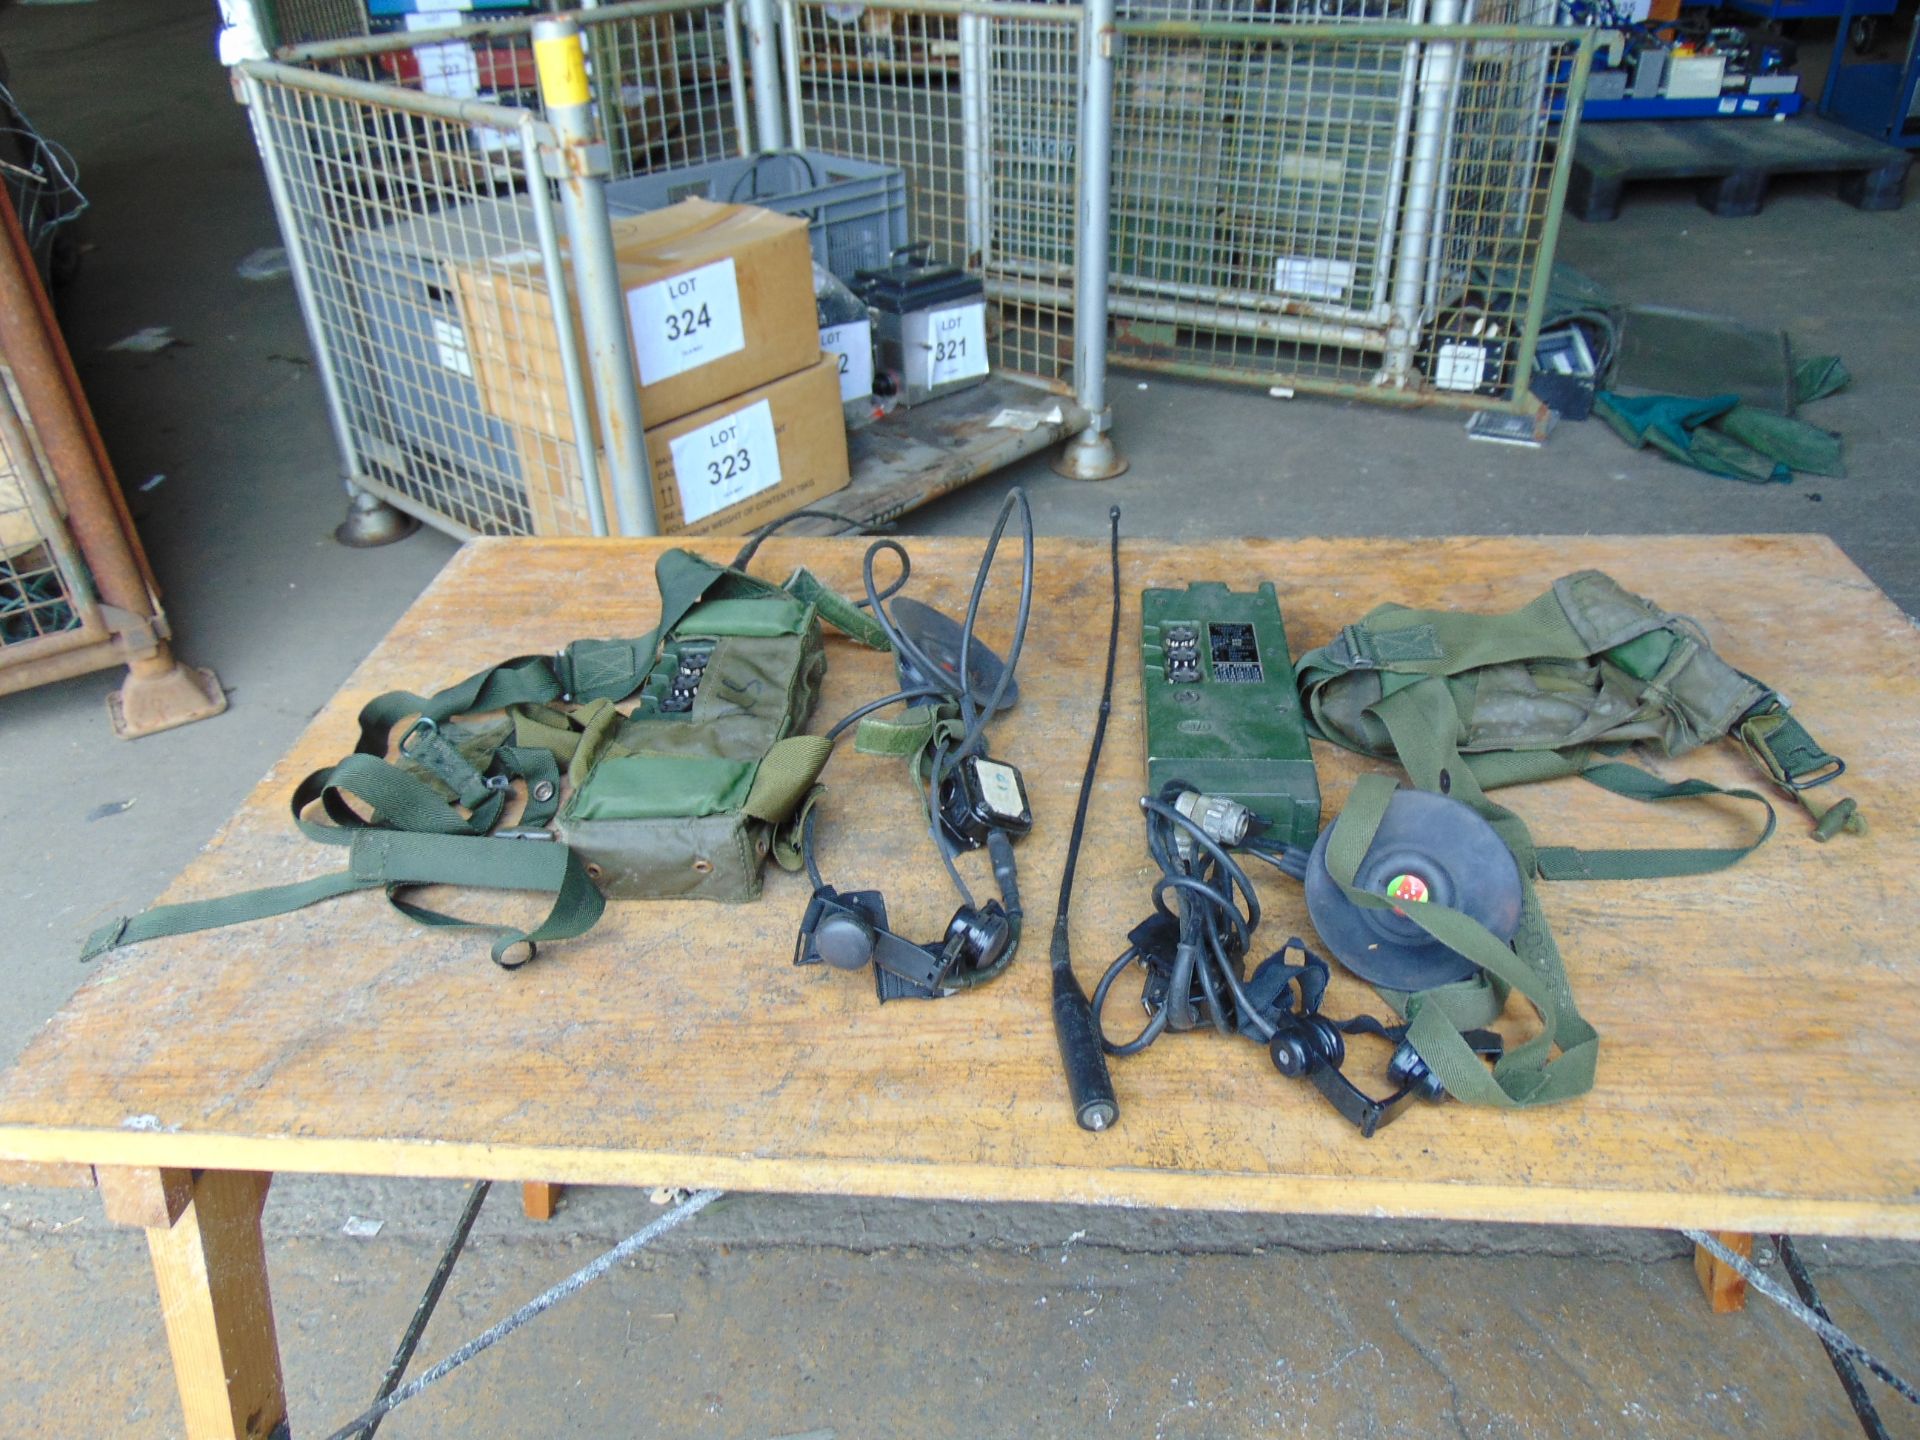 2 x RT 349 British Army Transmitter / Receiver c/w Pouch, Headset, Antenna and Battery Cassette - Image 5 of 5